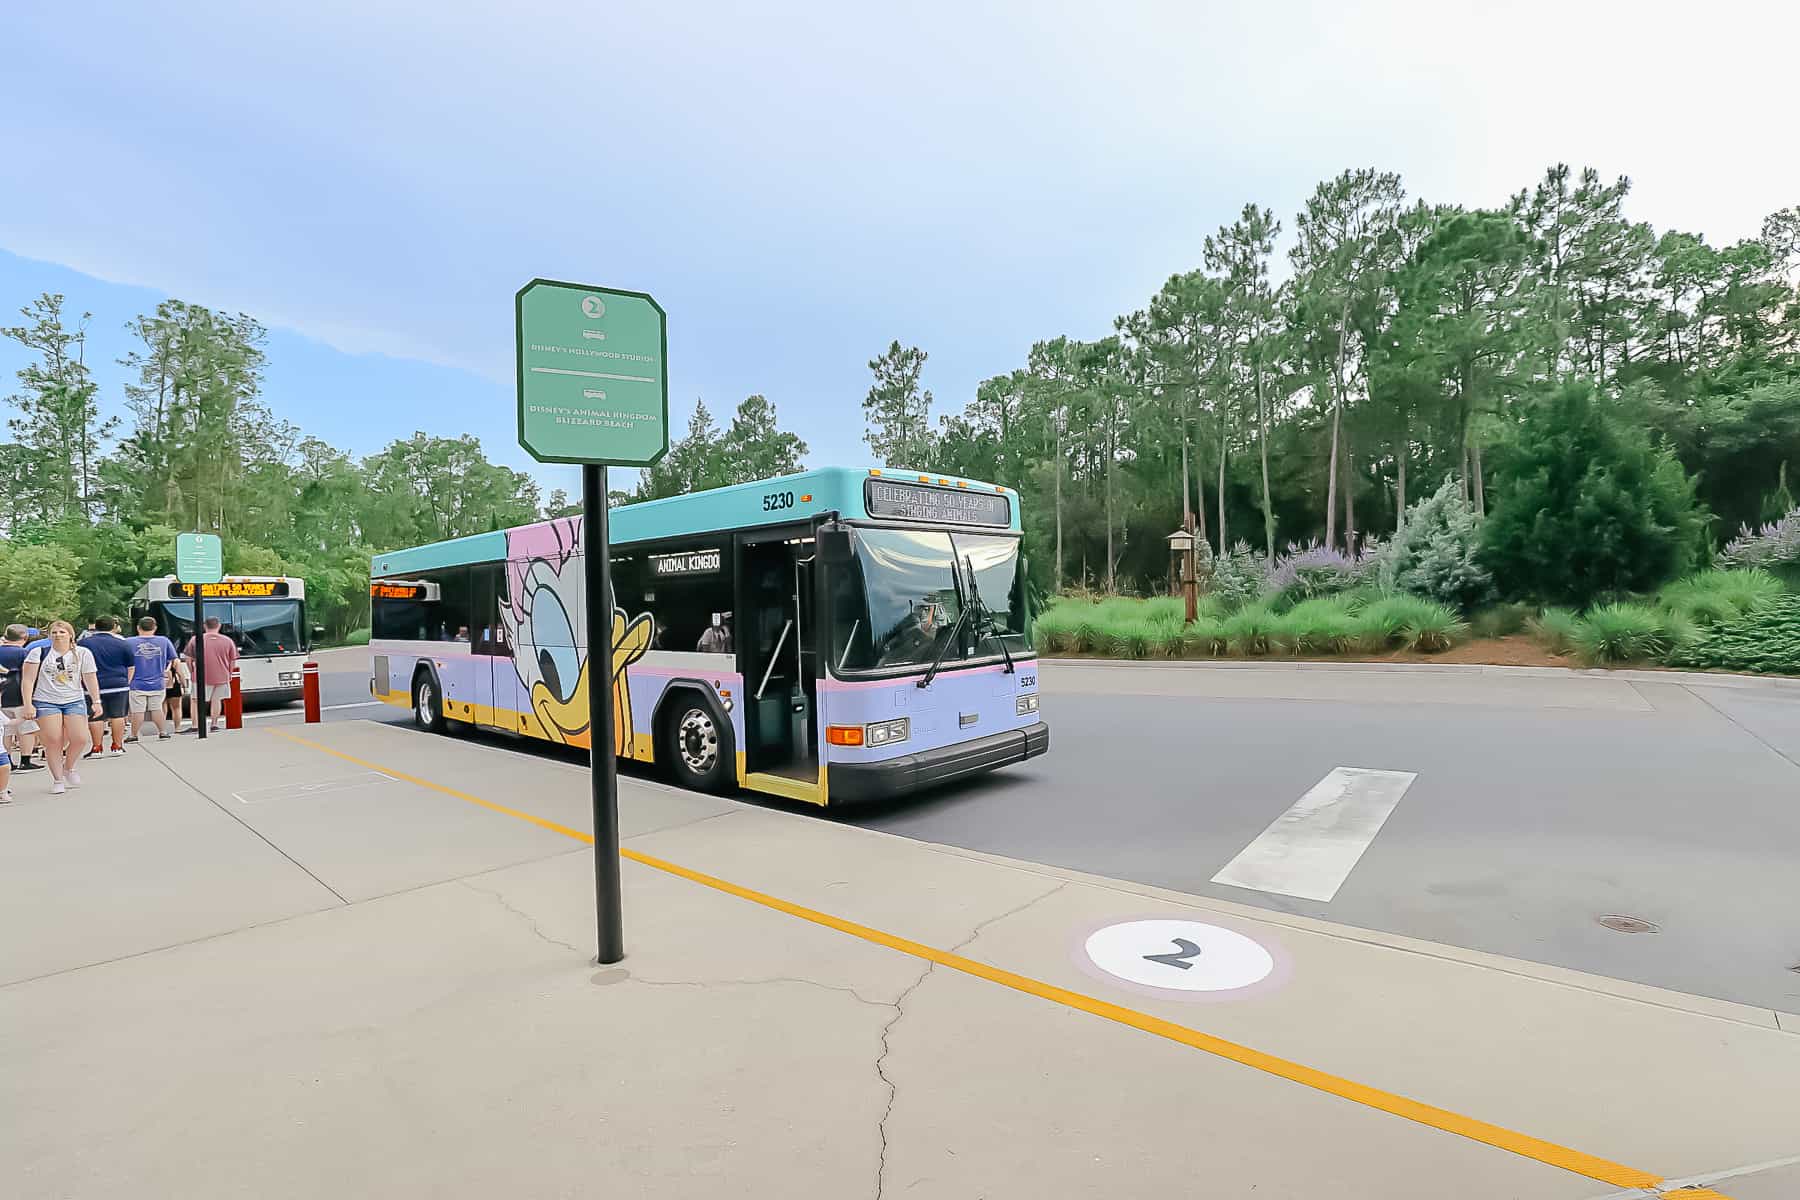 Bus stop for Disney's Animal Kingdom at Wilderness Lodge 